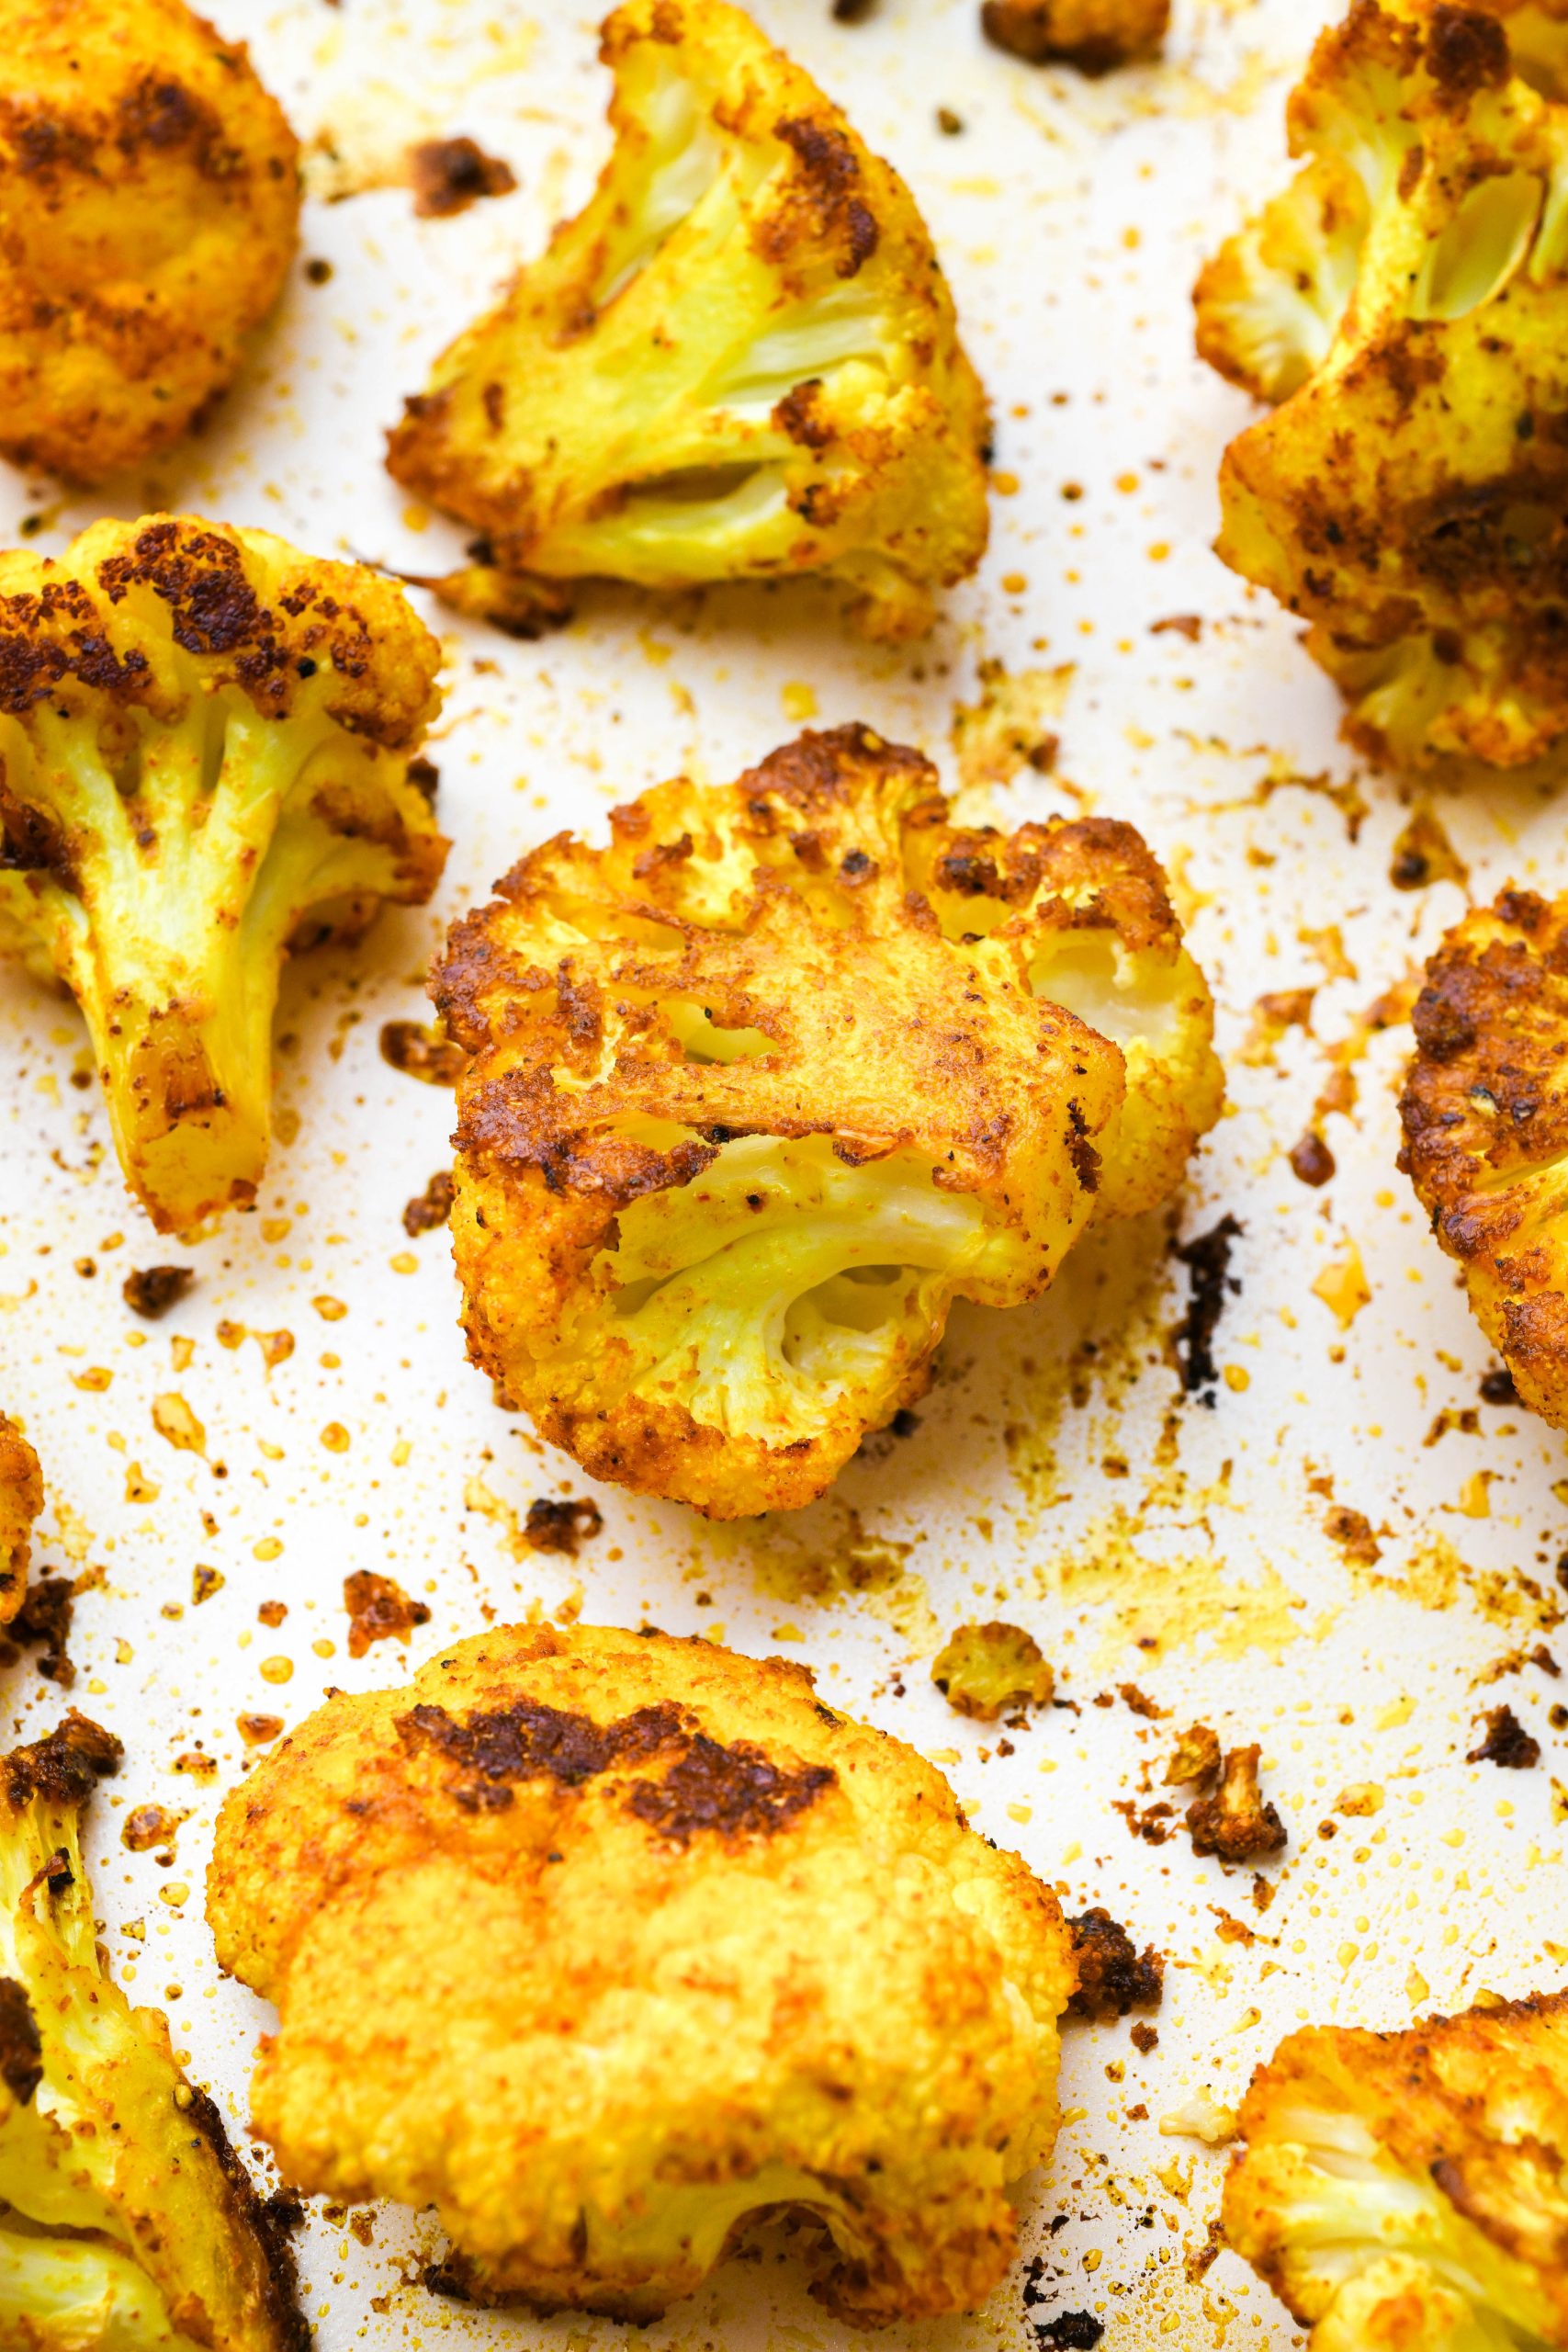 How to make Turmeric Roasted Cauliflower: Close up of cauliflower florets tossed with oil and spices after roasting.